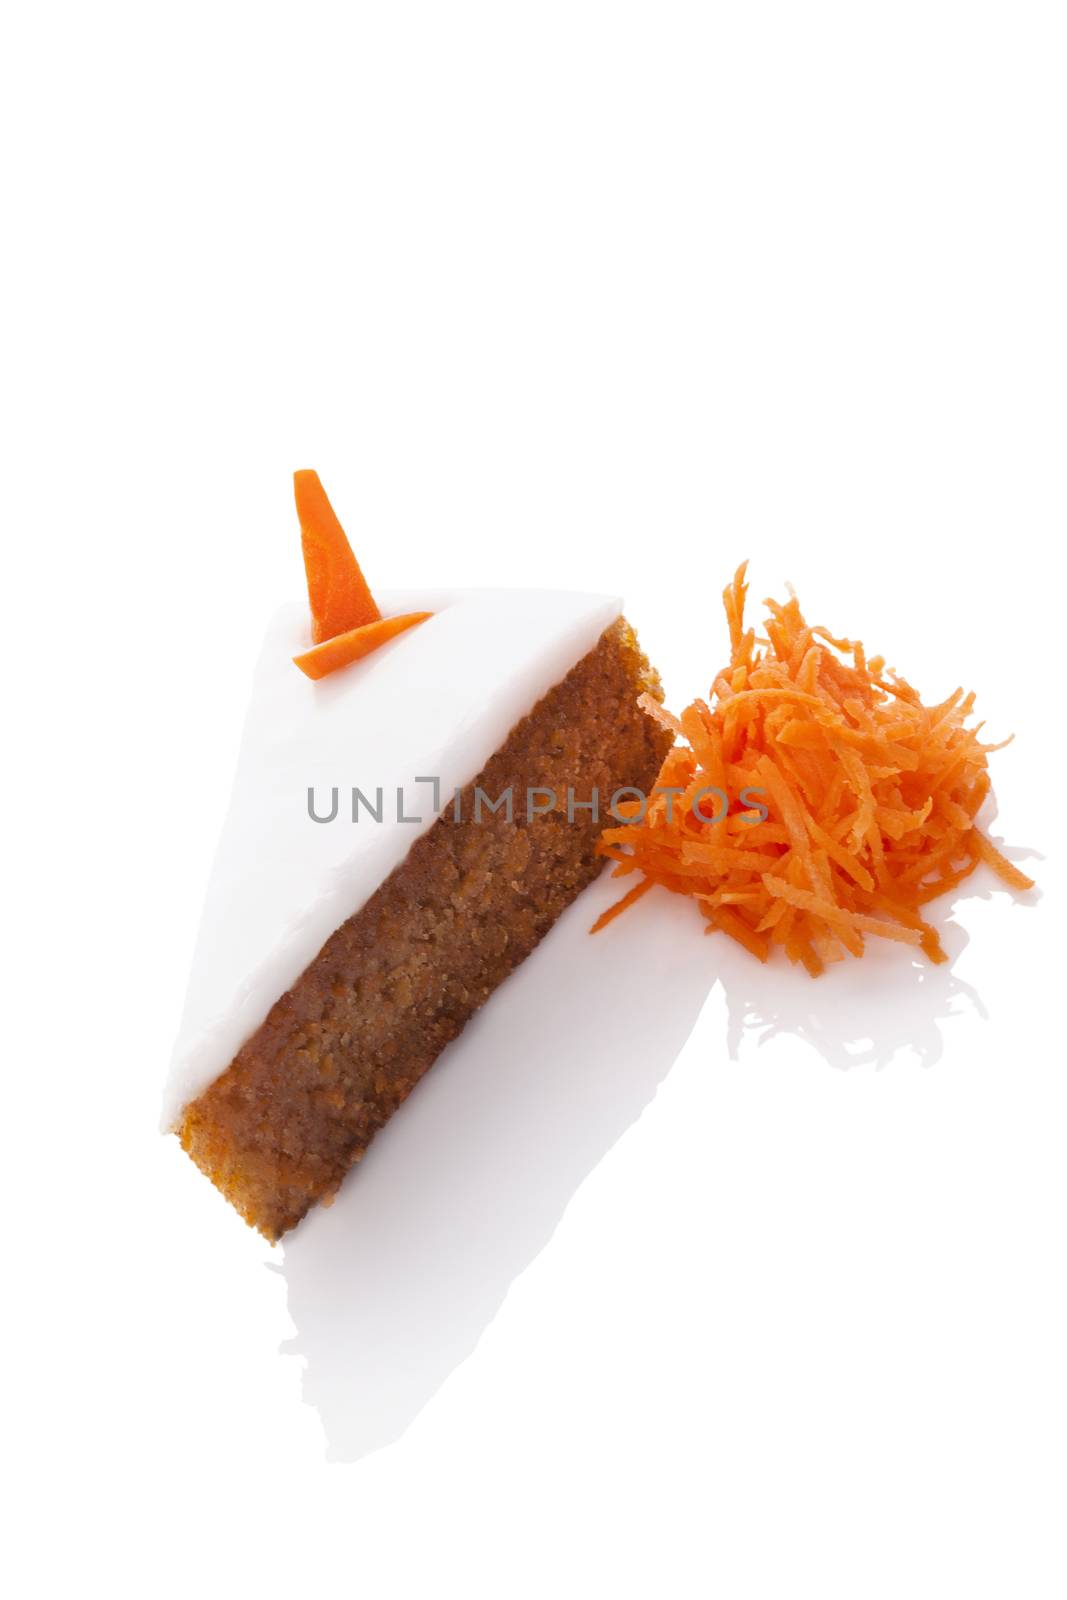 Delicious carrot cake on grated carrots isolated on white background. Culinary sweet dessert.